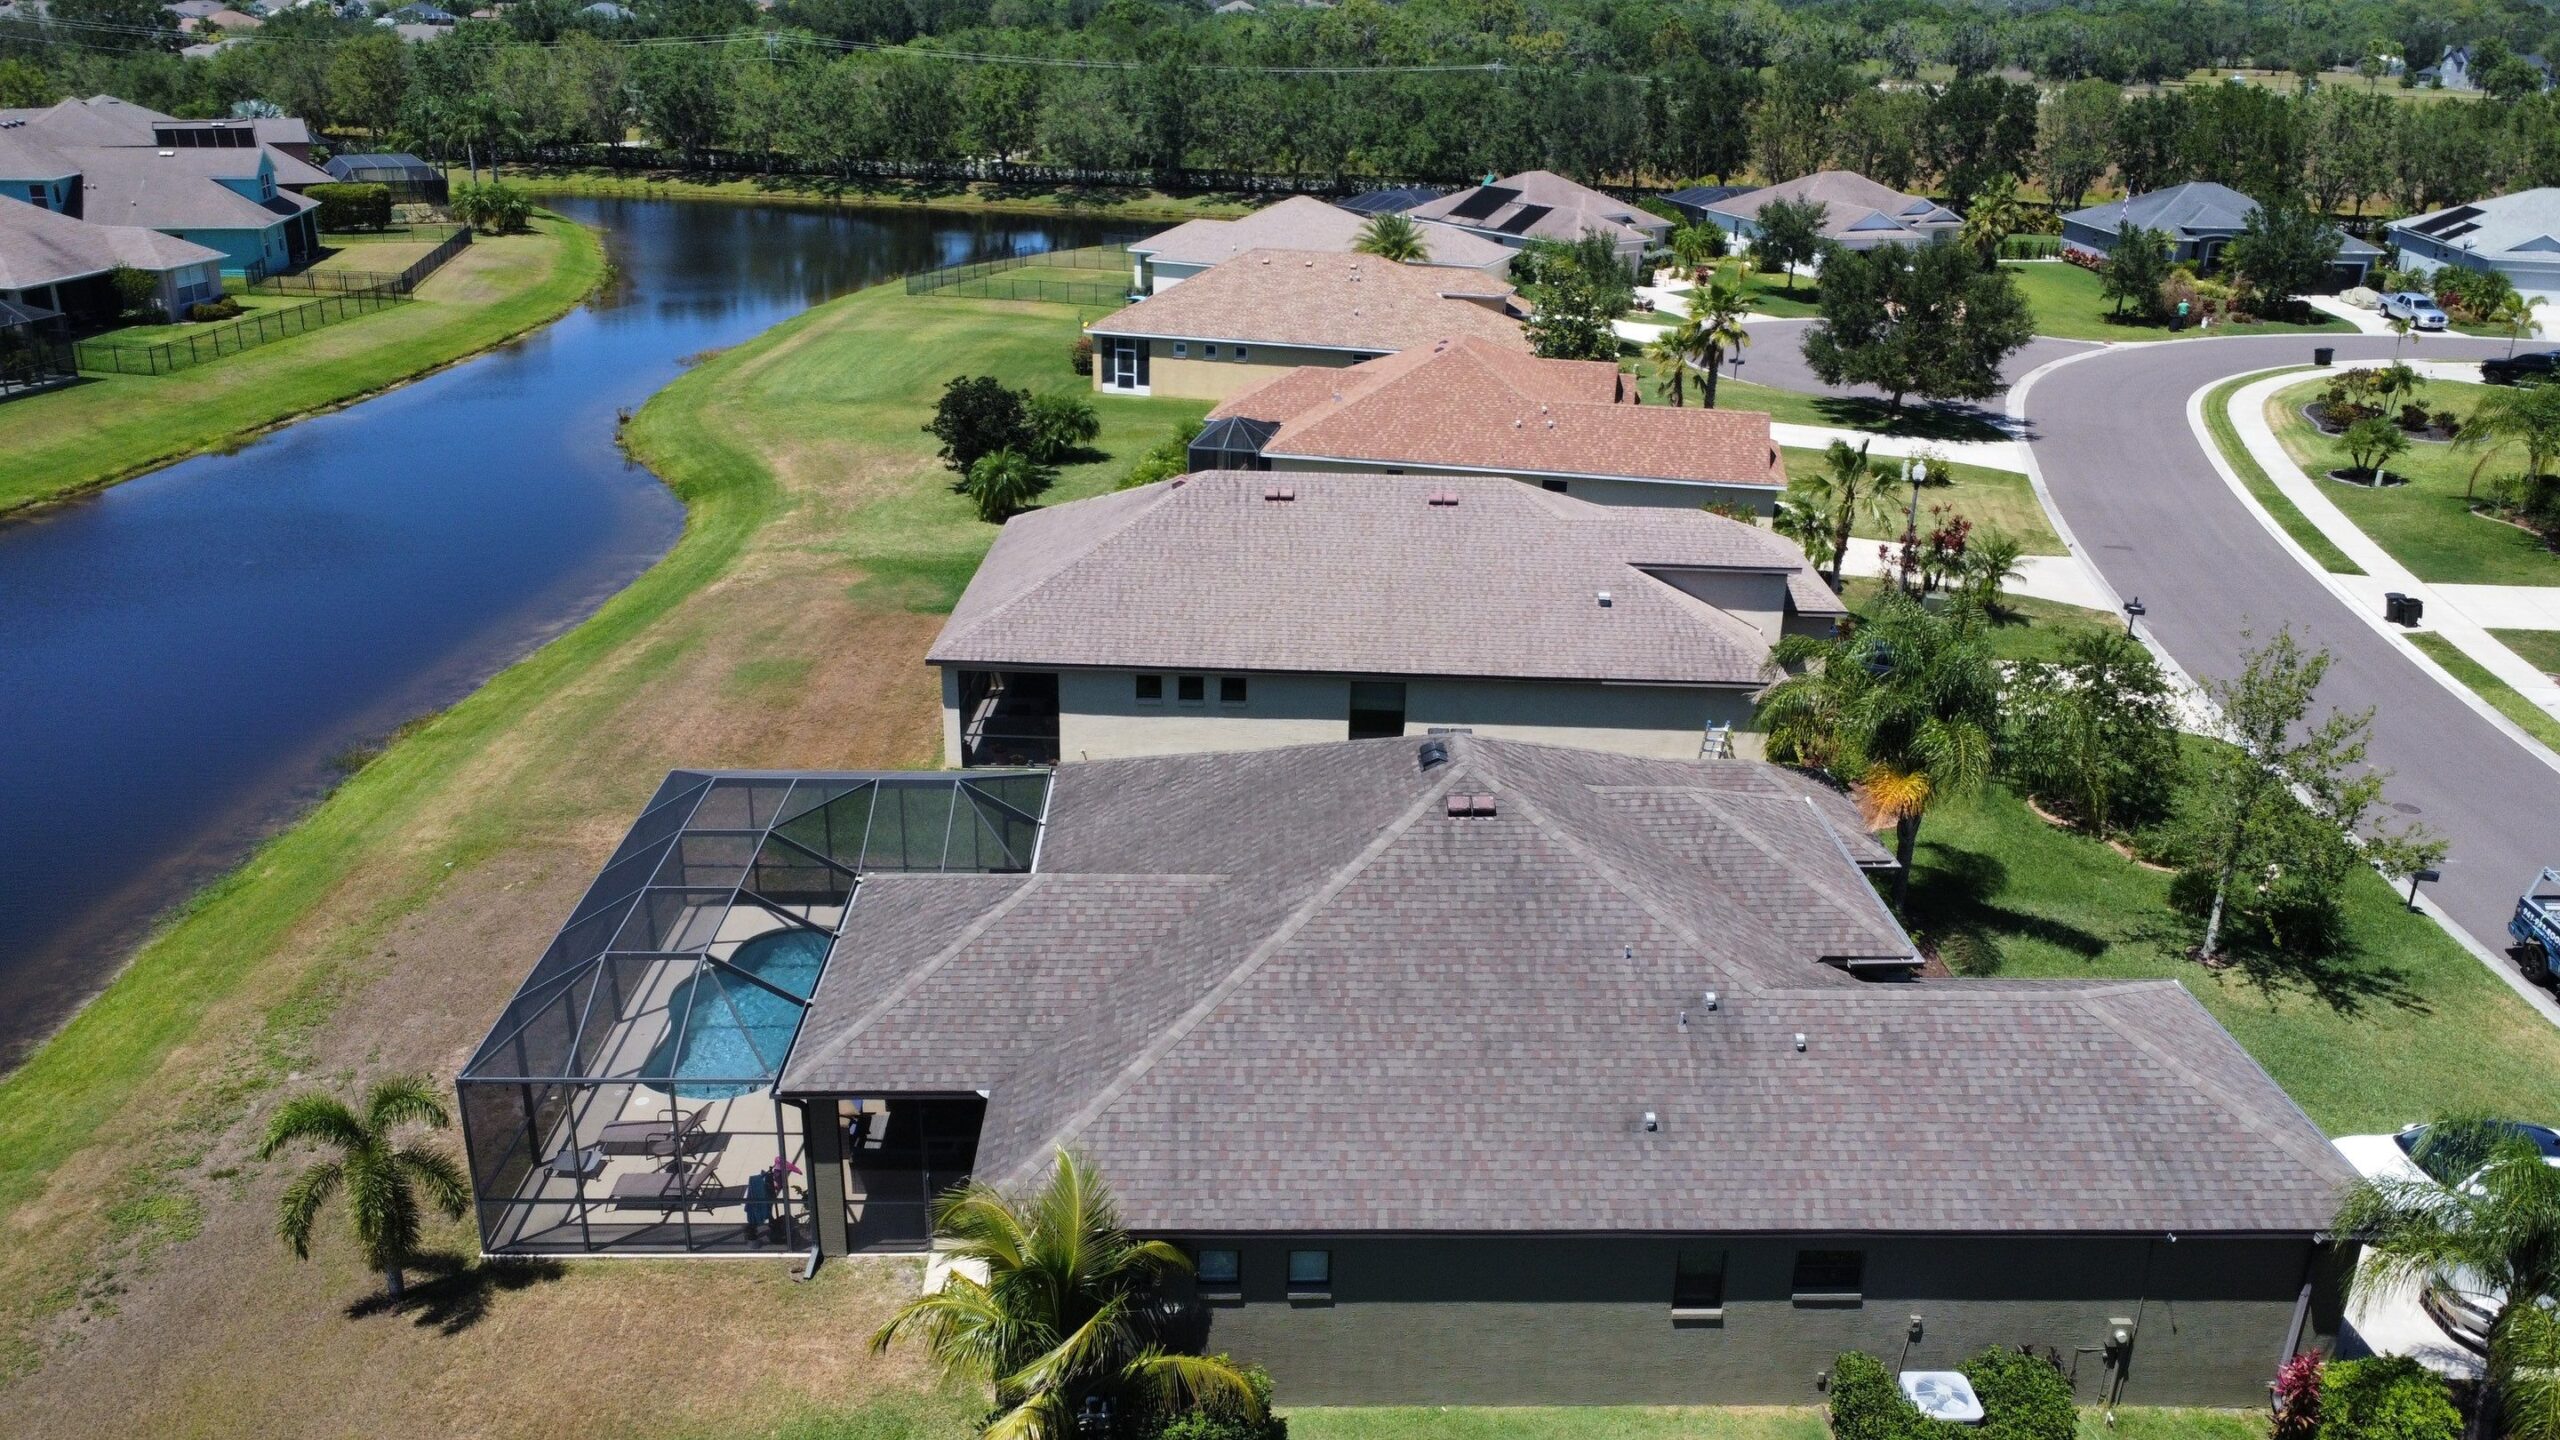 Houses with colorful roofs - Roof Repair Services Sarasota, FL